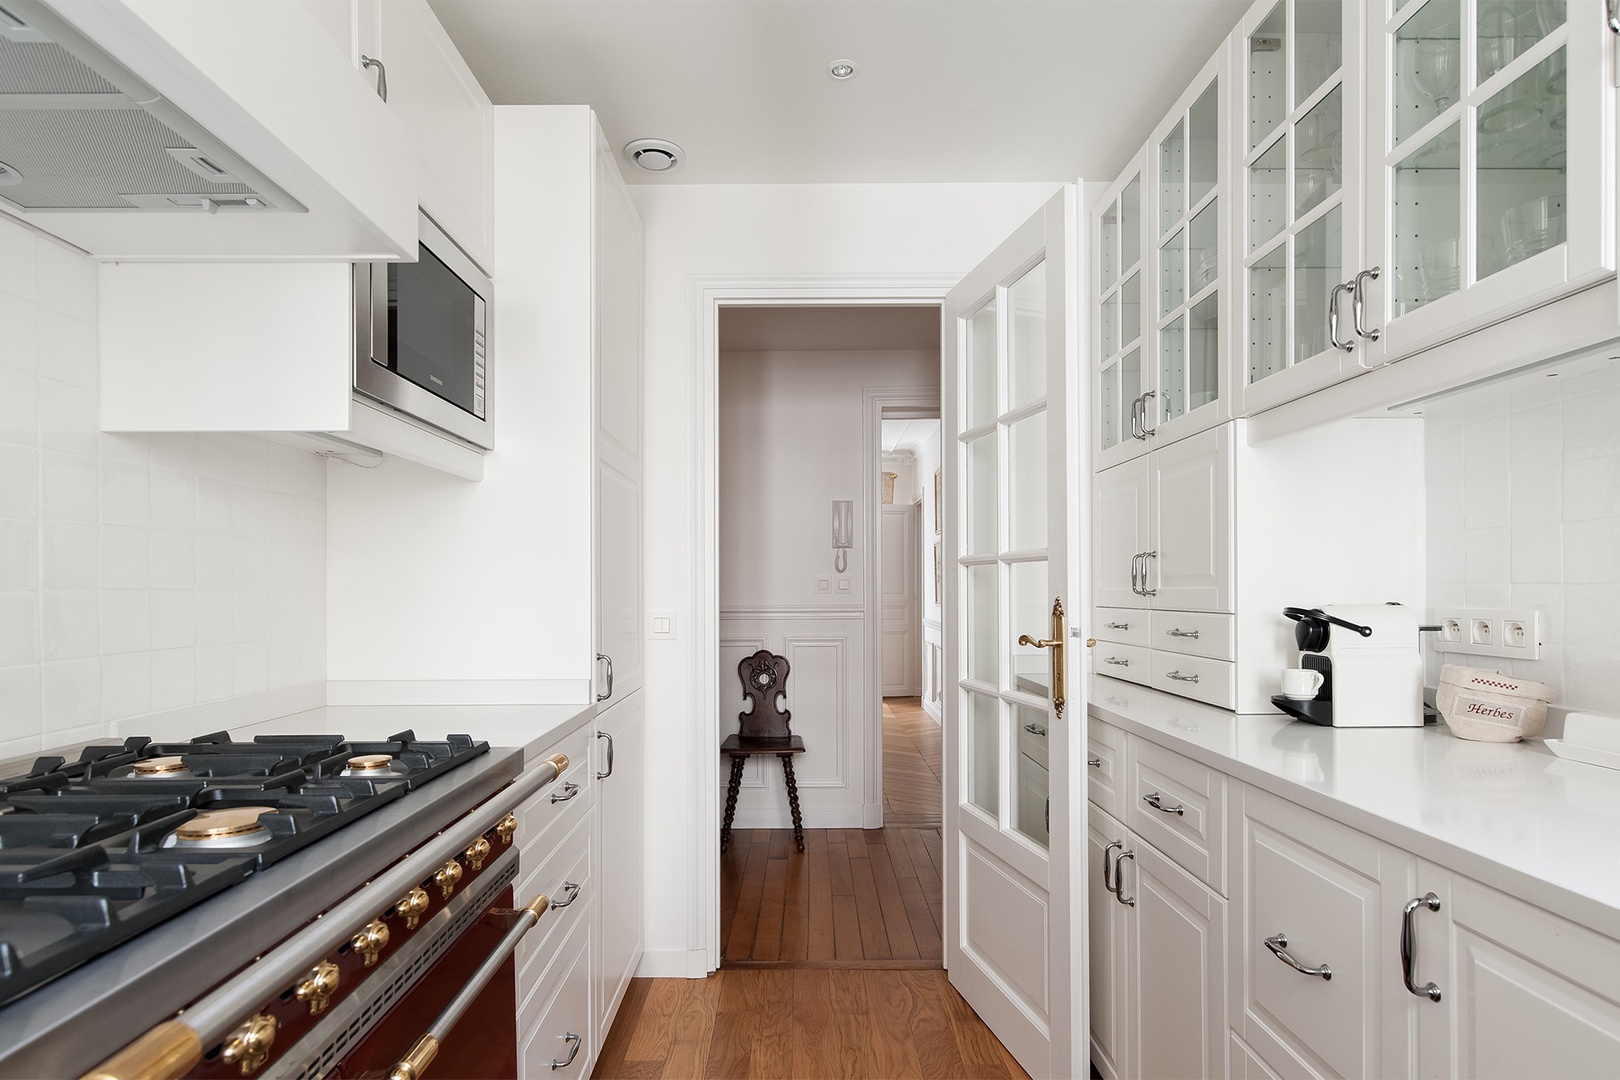 The kitchen features a vintage-style gas stove top and oven.